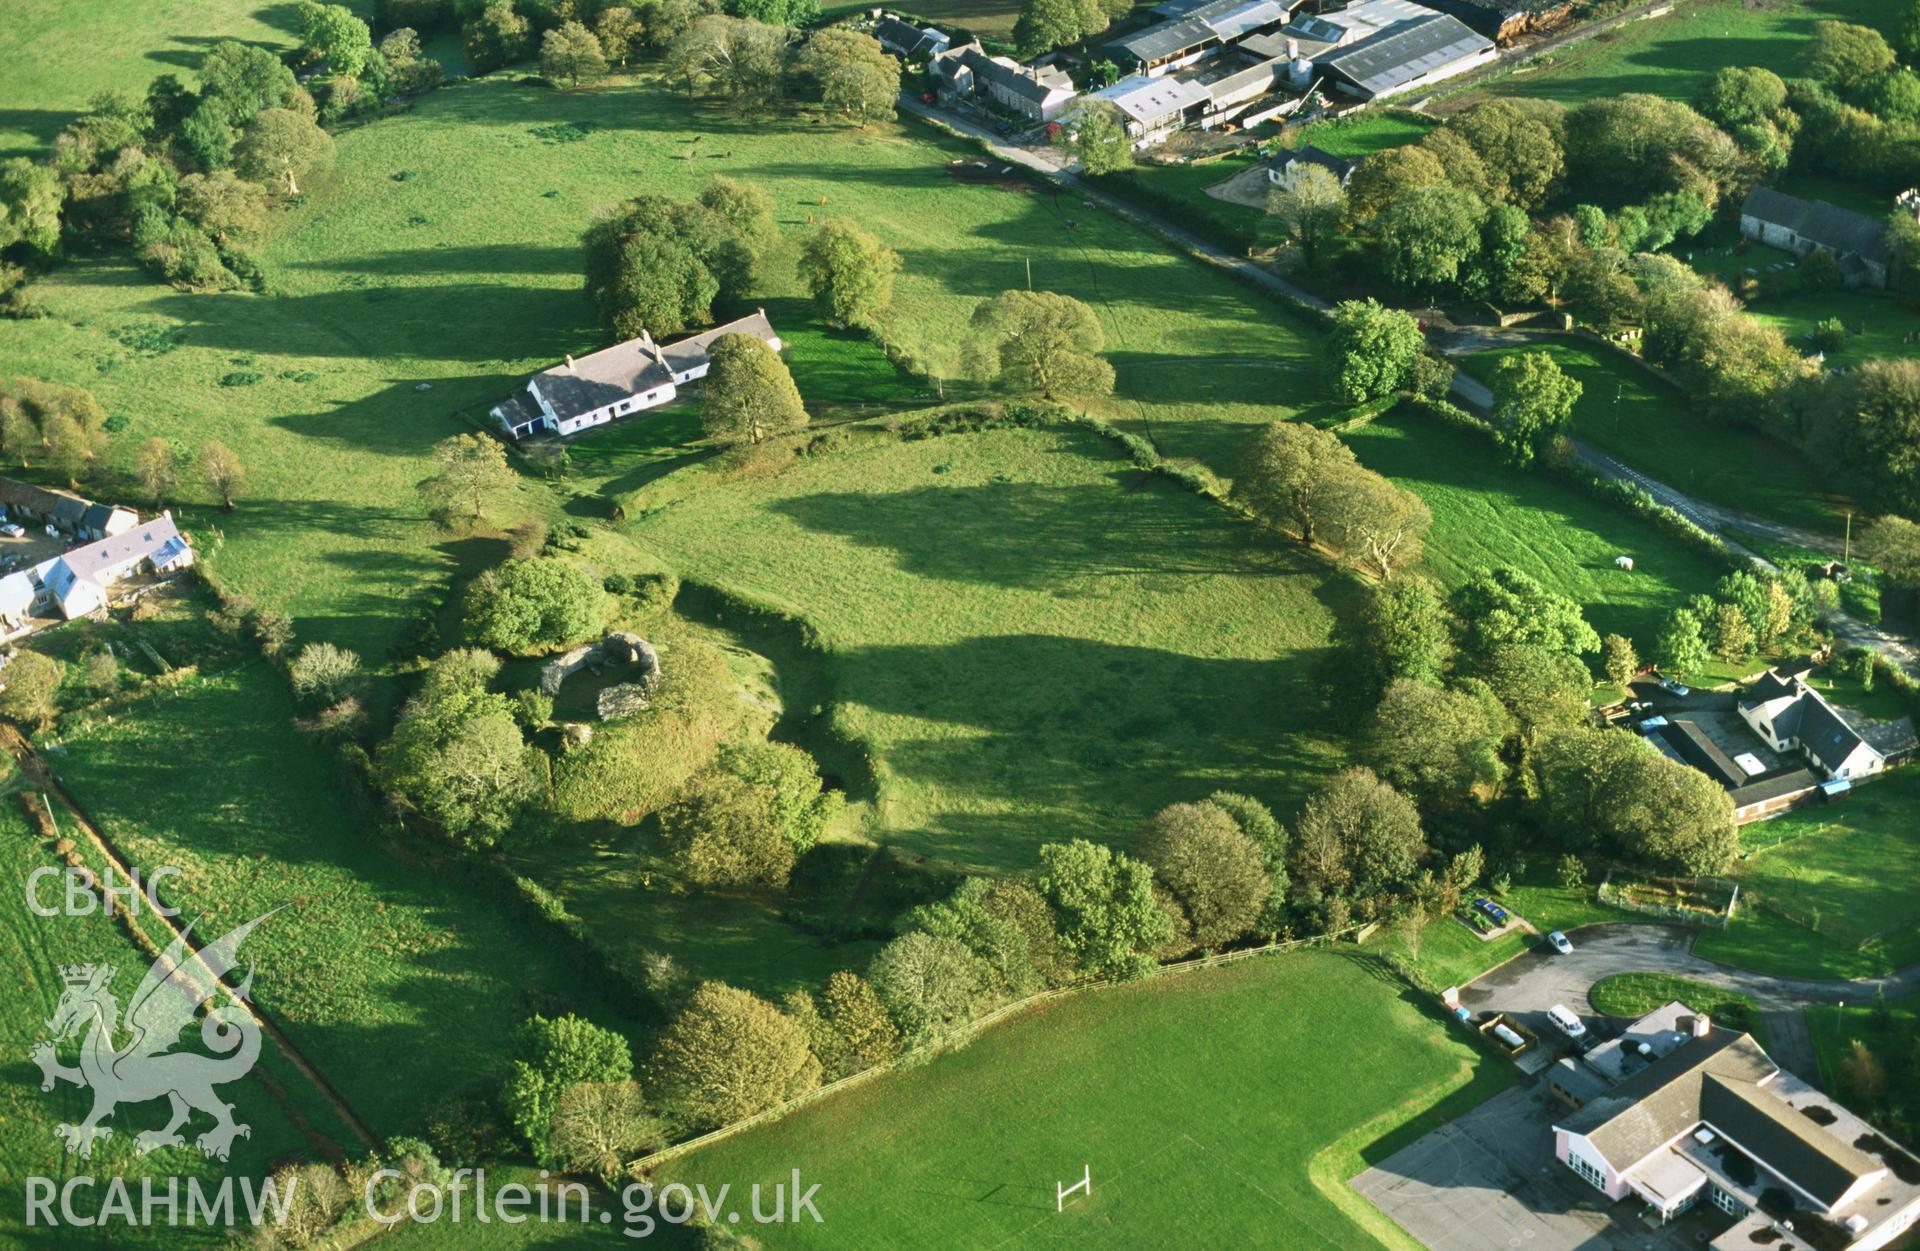 RCAHMW colour oblique aerial photograph of Wiston Castle, in low evening sunlight. Taken by Toby Driver on 18/10/2002